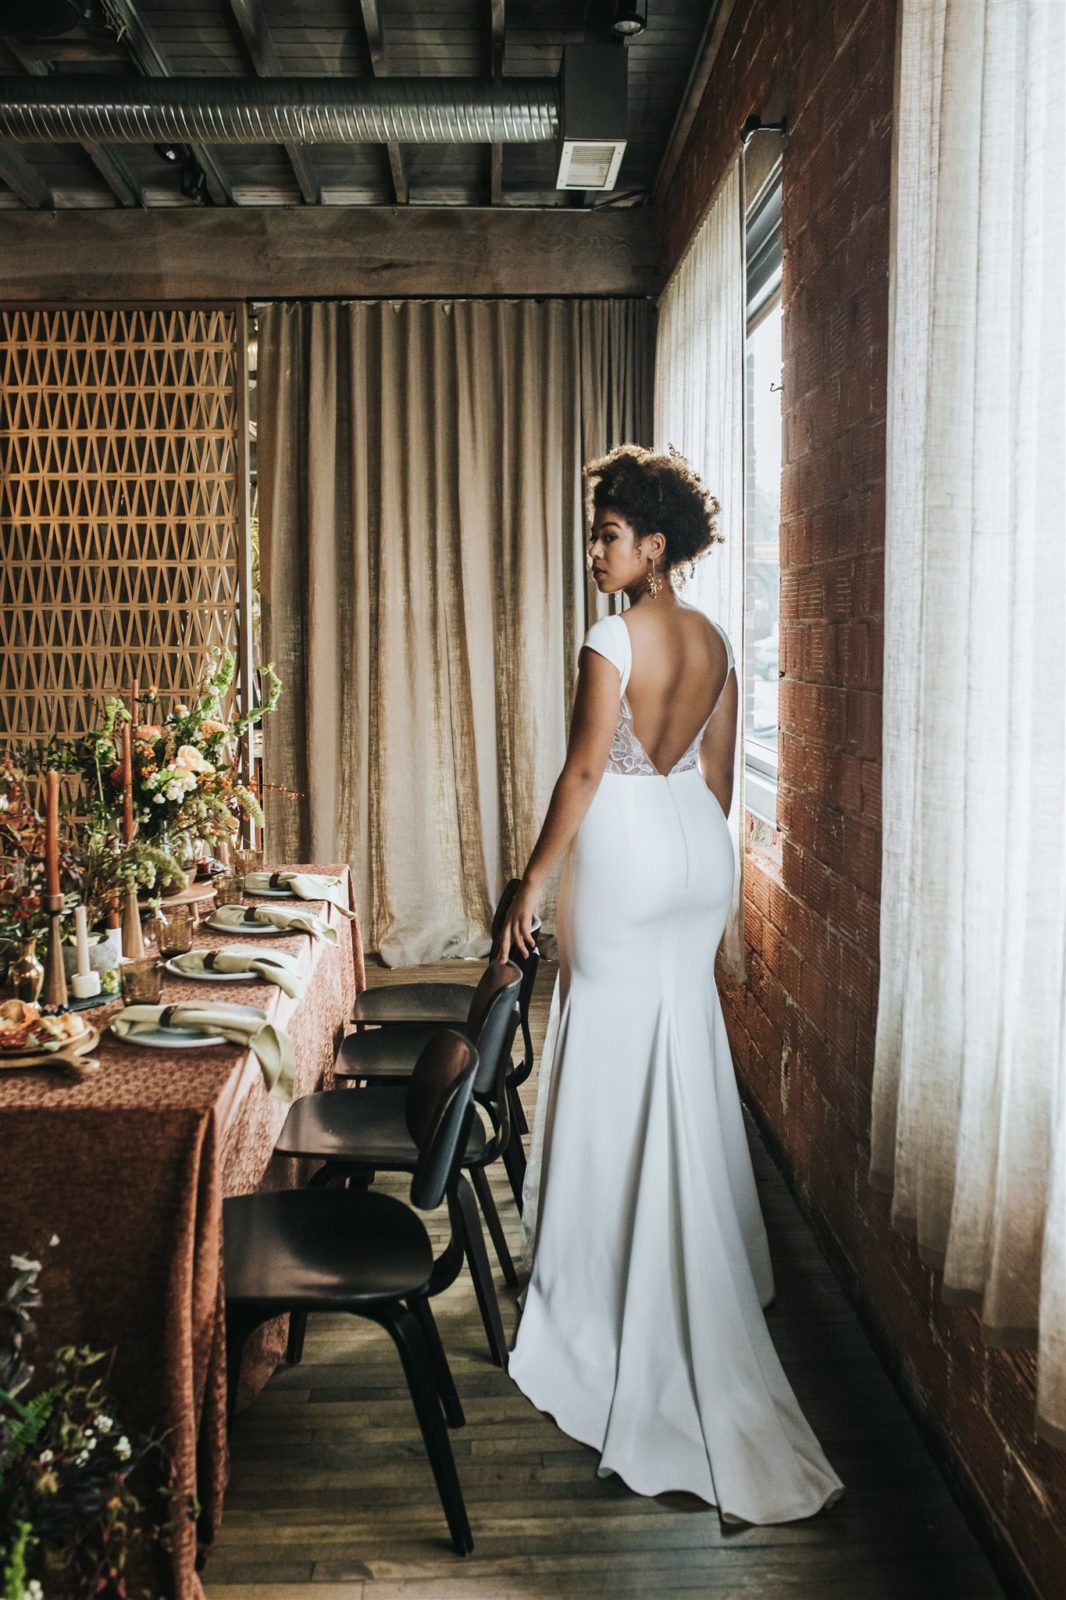 Fall inspired wedding colour palette for an earthy and moody bridal editorial at Bridgette Bar in Calgary Alberta